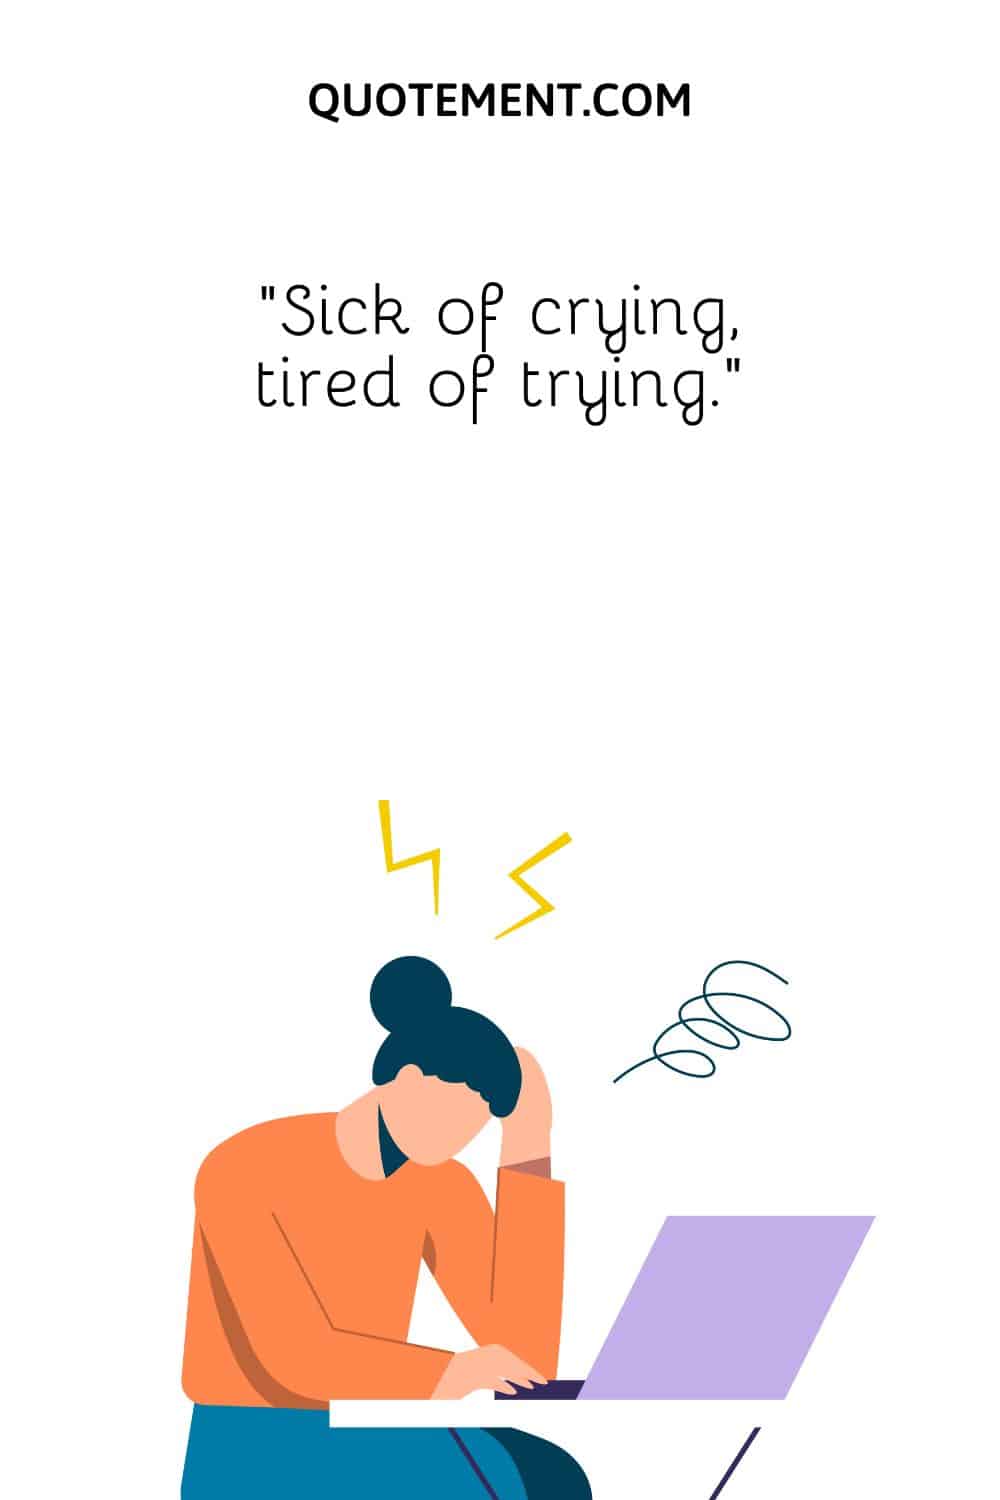 Sick of crying, tired of trying